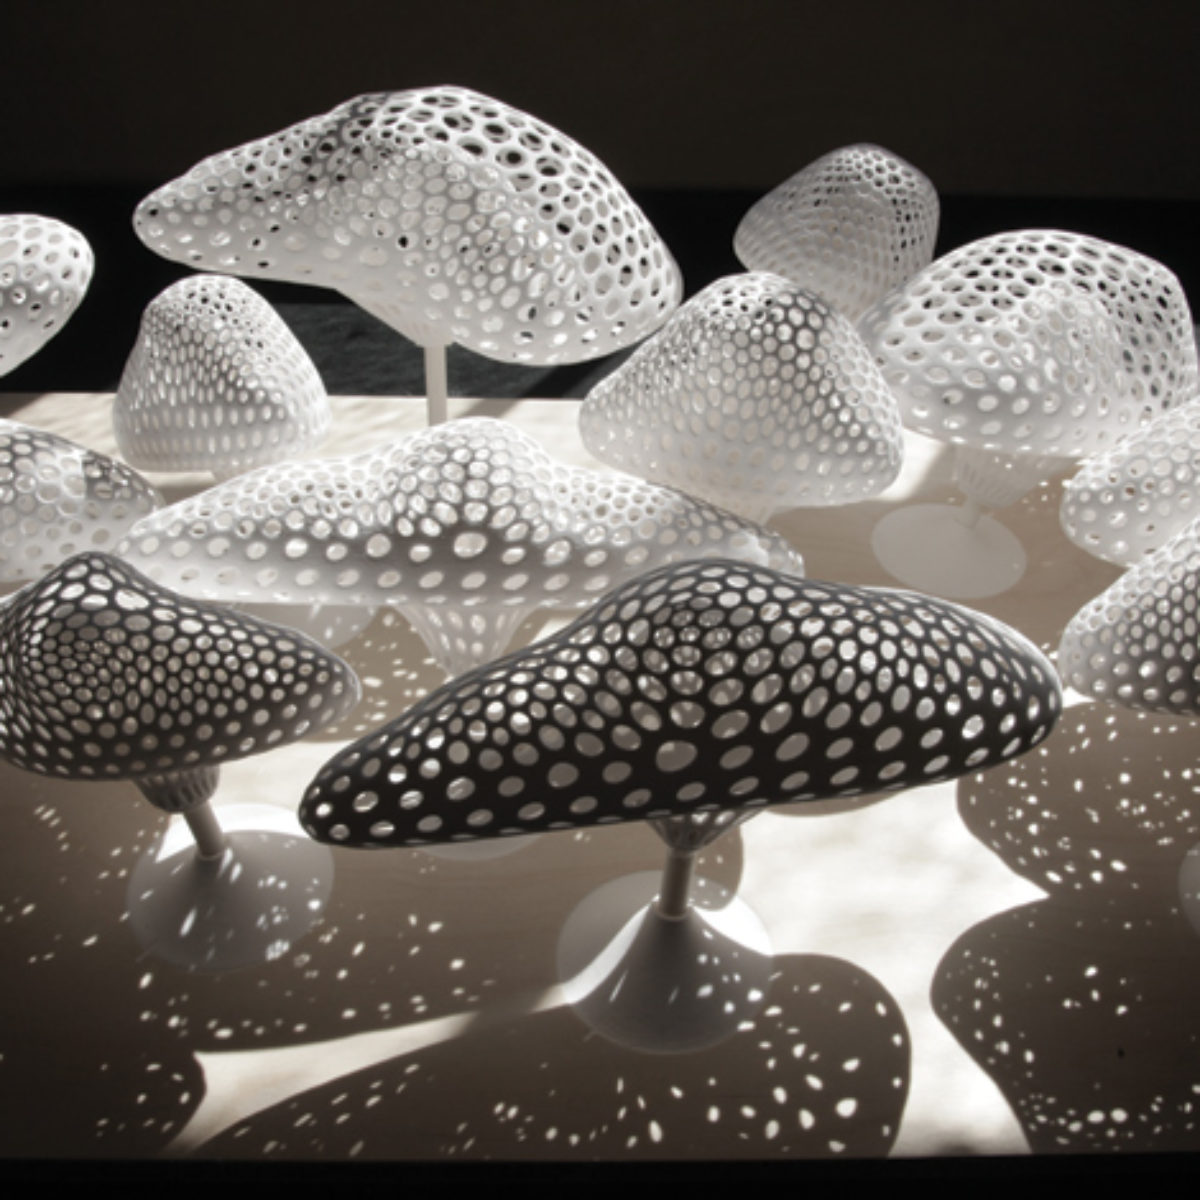 Overcast - Guan Lee, Mamou-Mani - 3D Printed Cloudlets Ceiling Installation